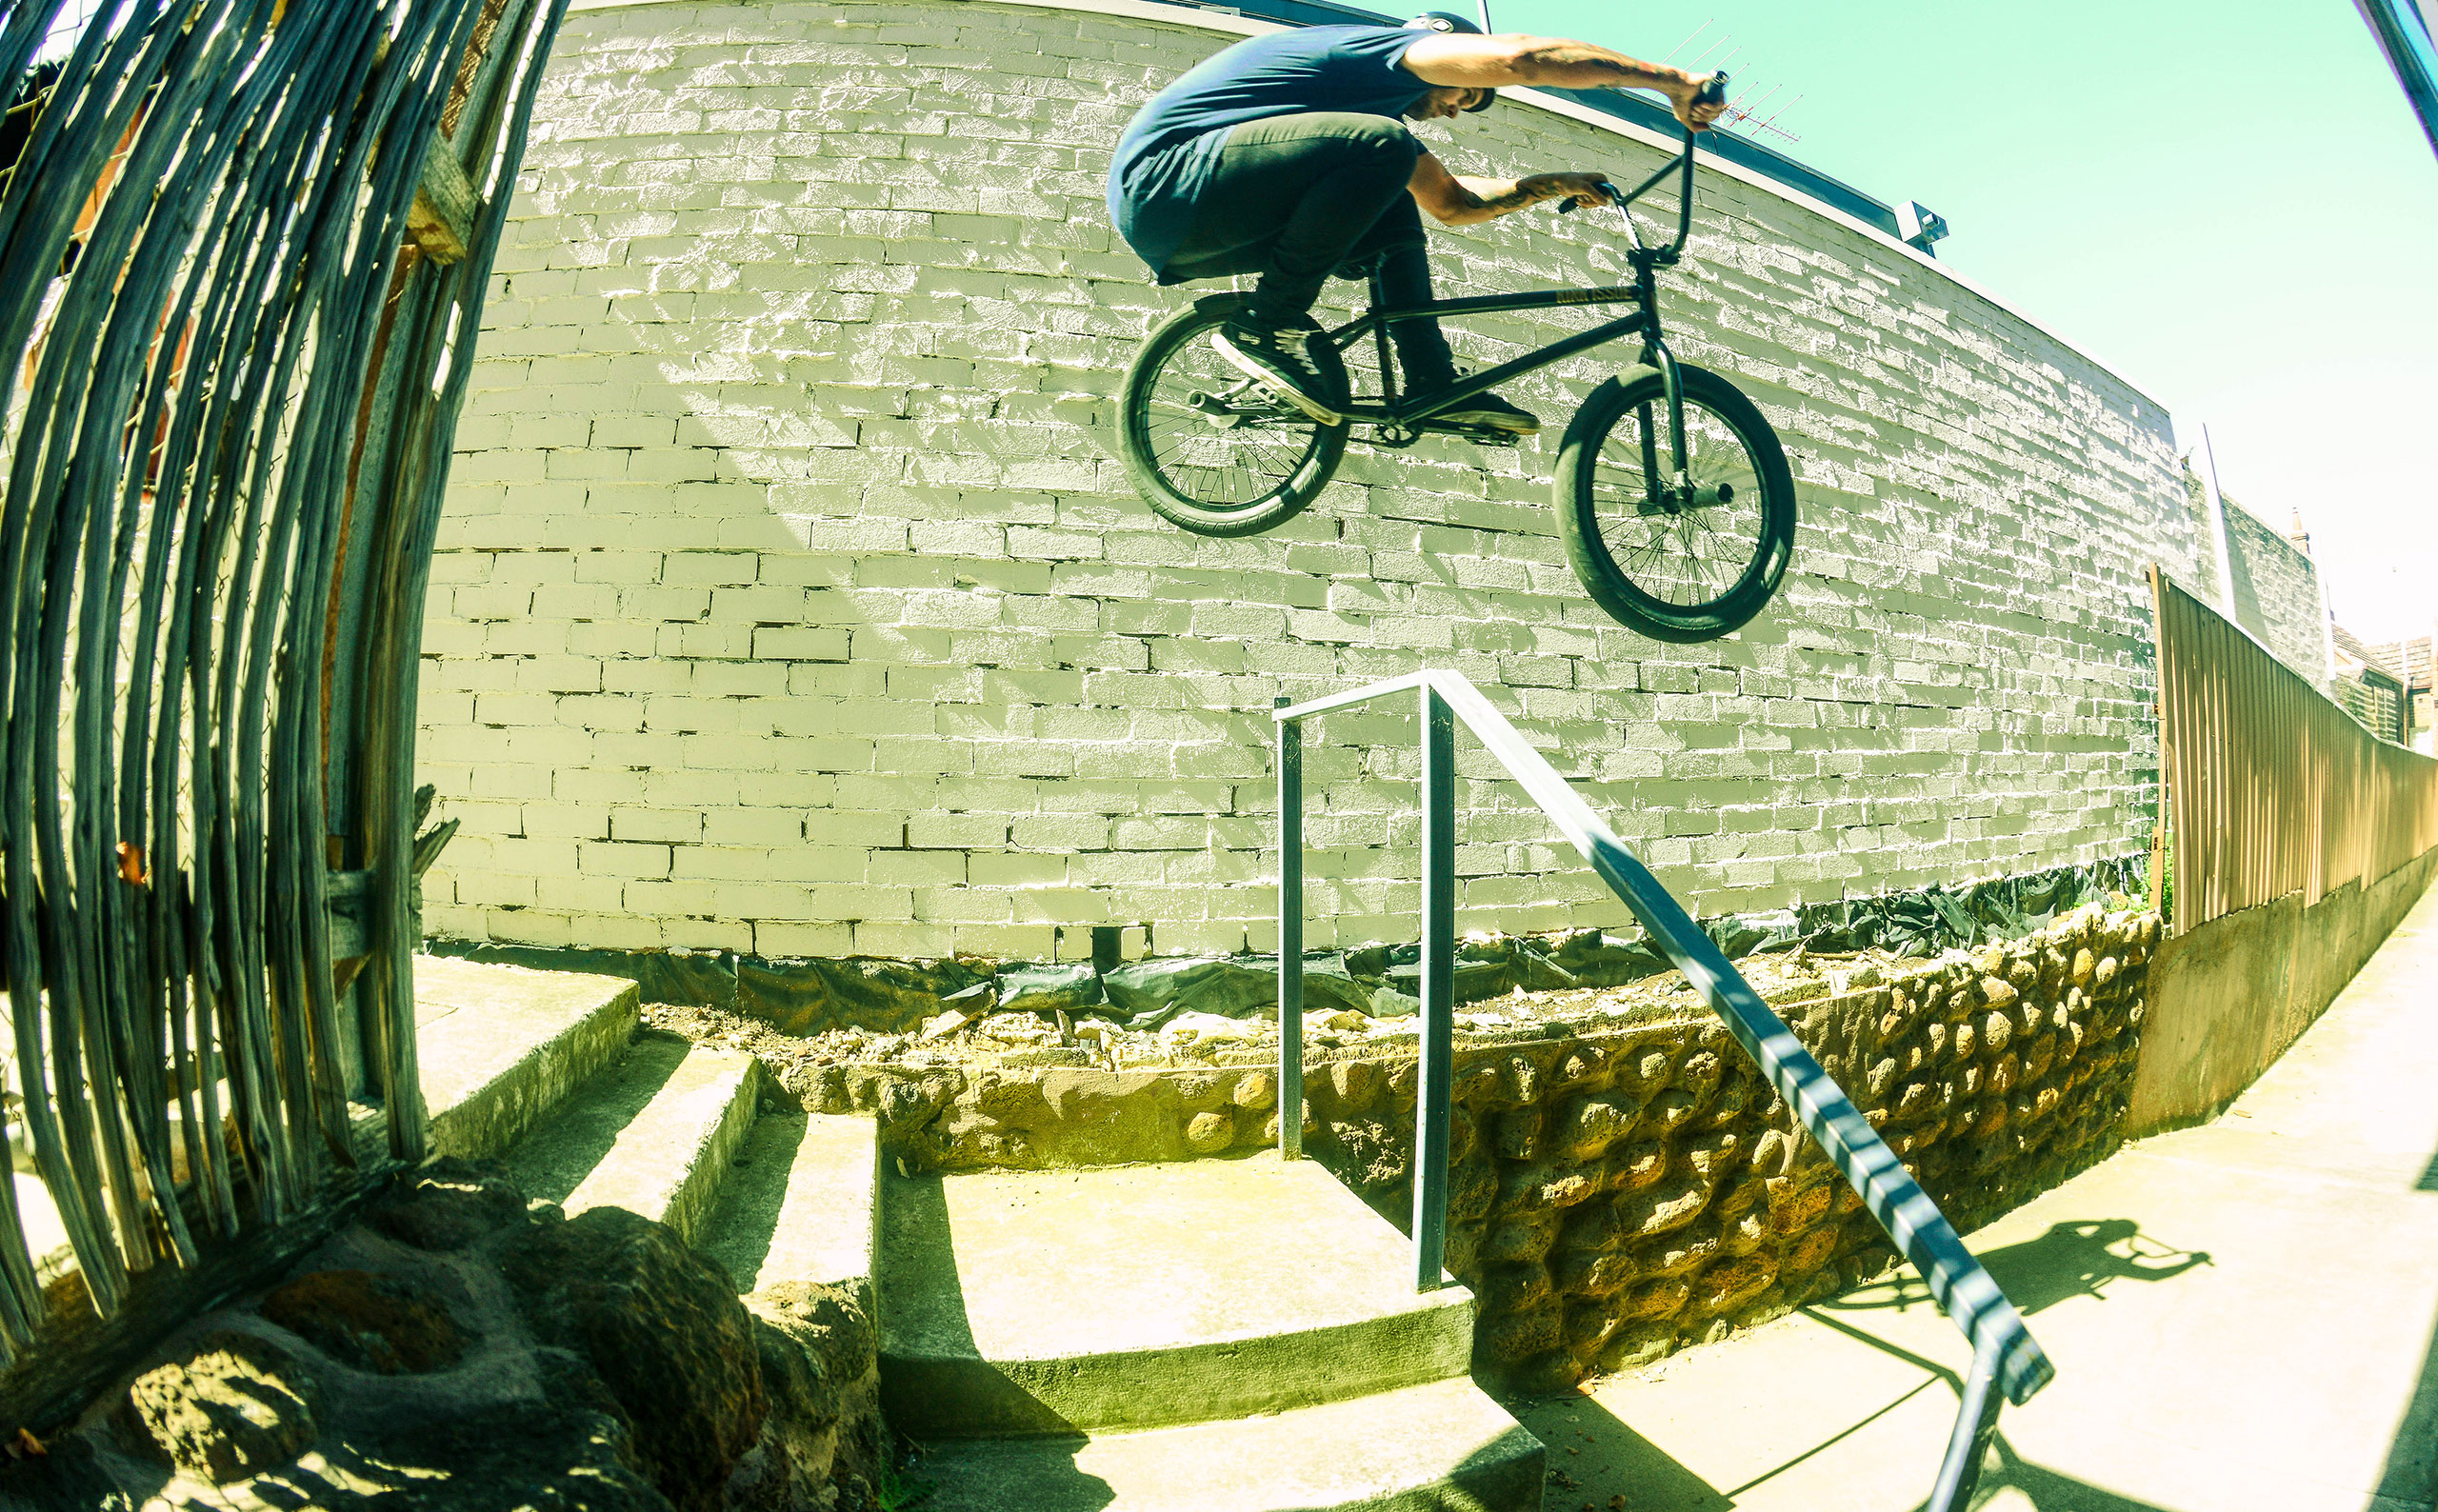 Every now and then Luke Vandenberg shows his riding skills off, large hop and drop in an apartment complex.